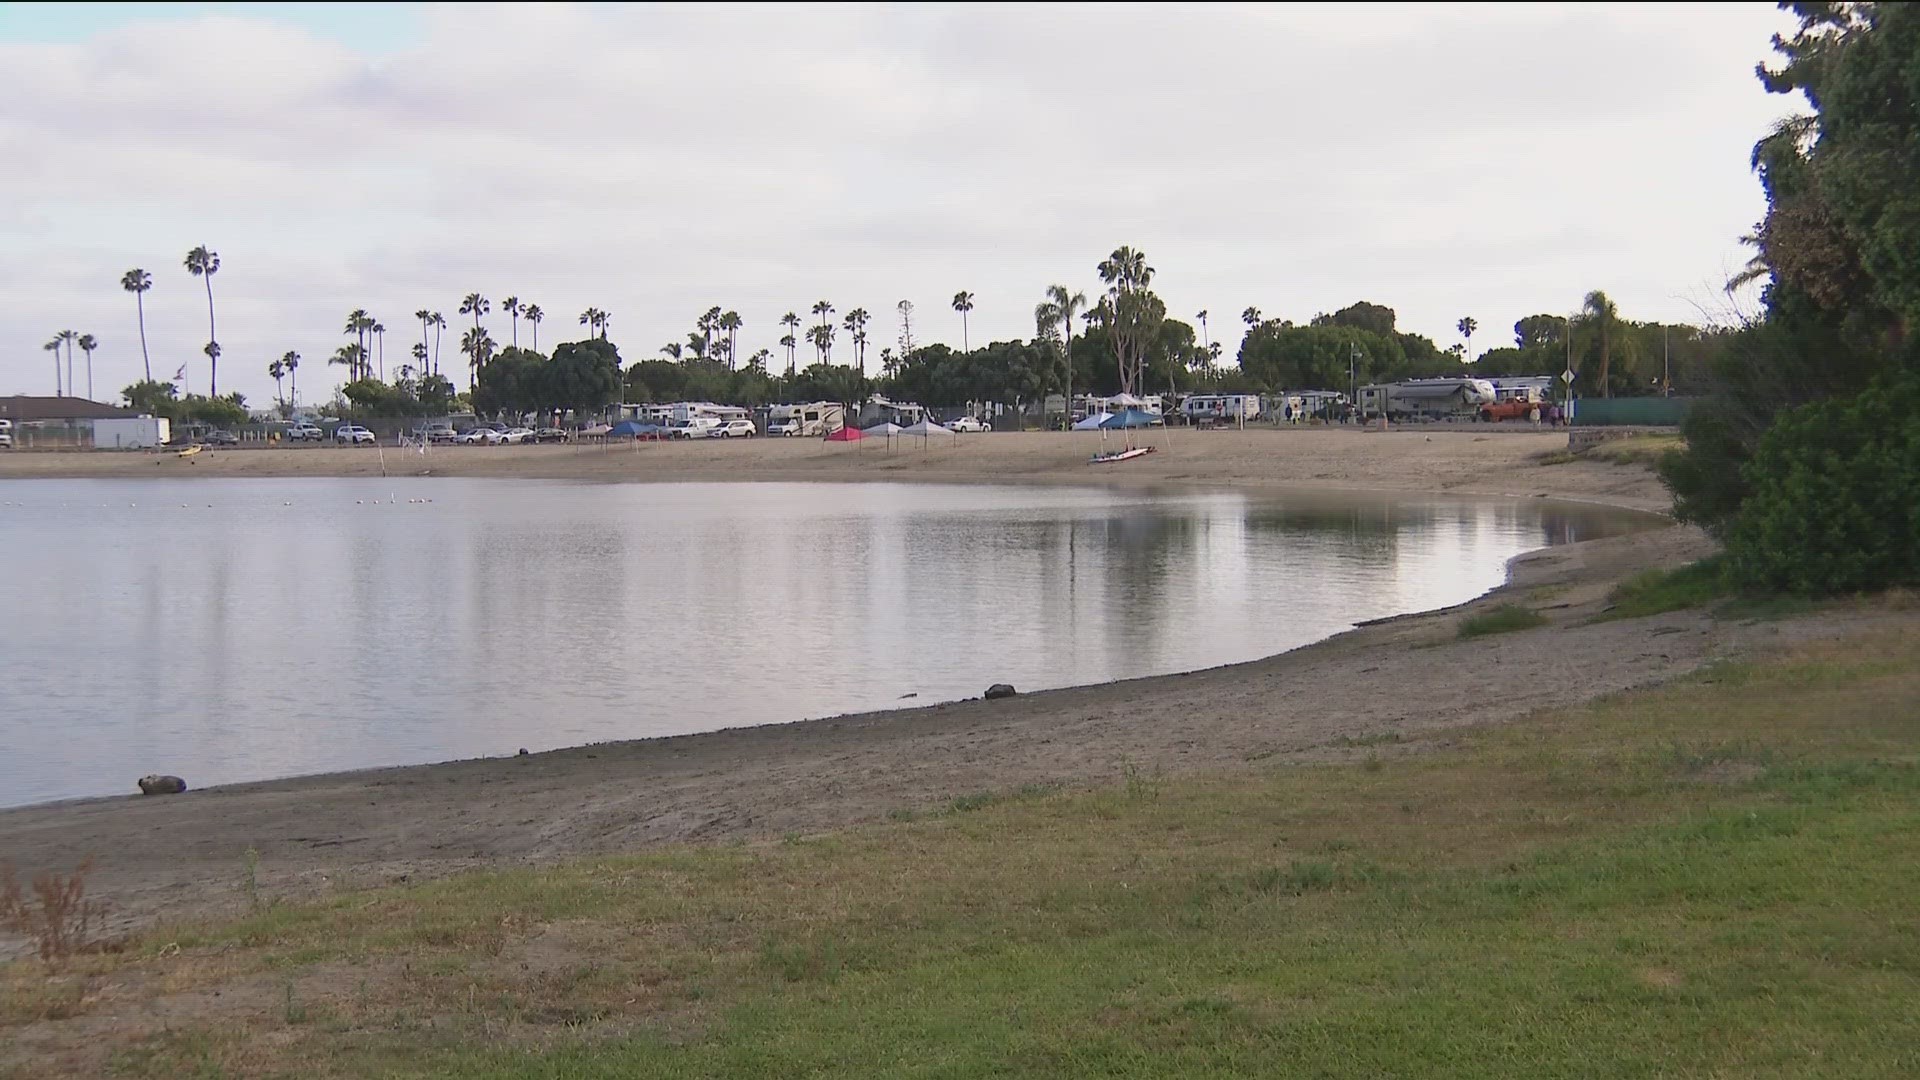 Environmental advocates and local sports organizations come to an agreement that would relocate the sports fields before creating buffers and wetlands.